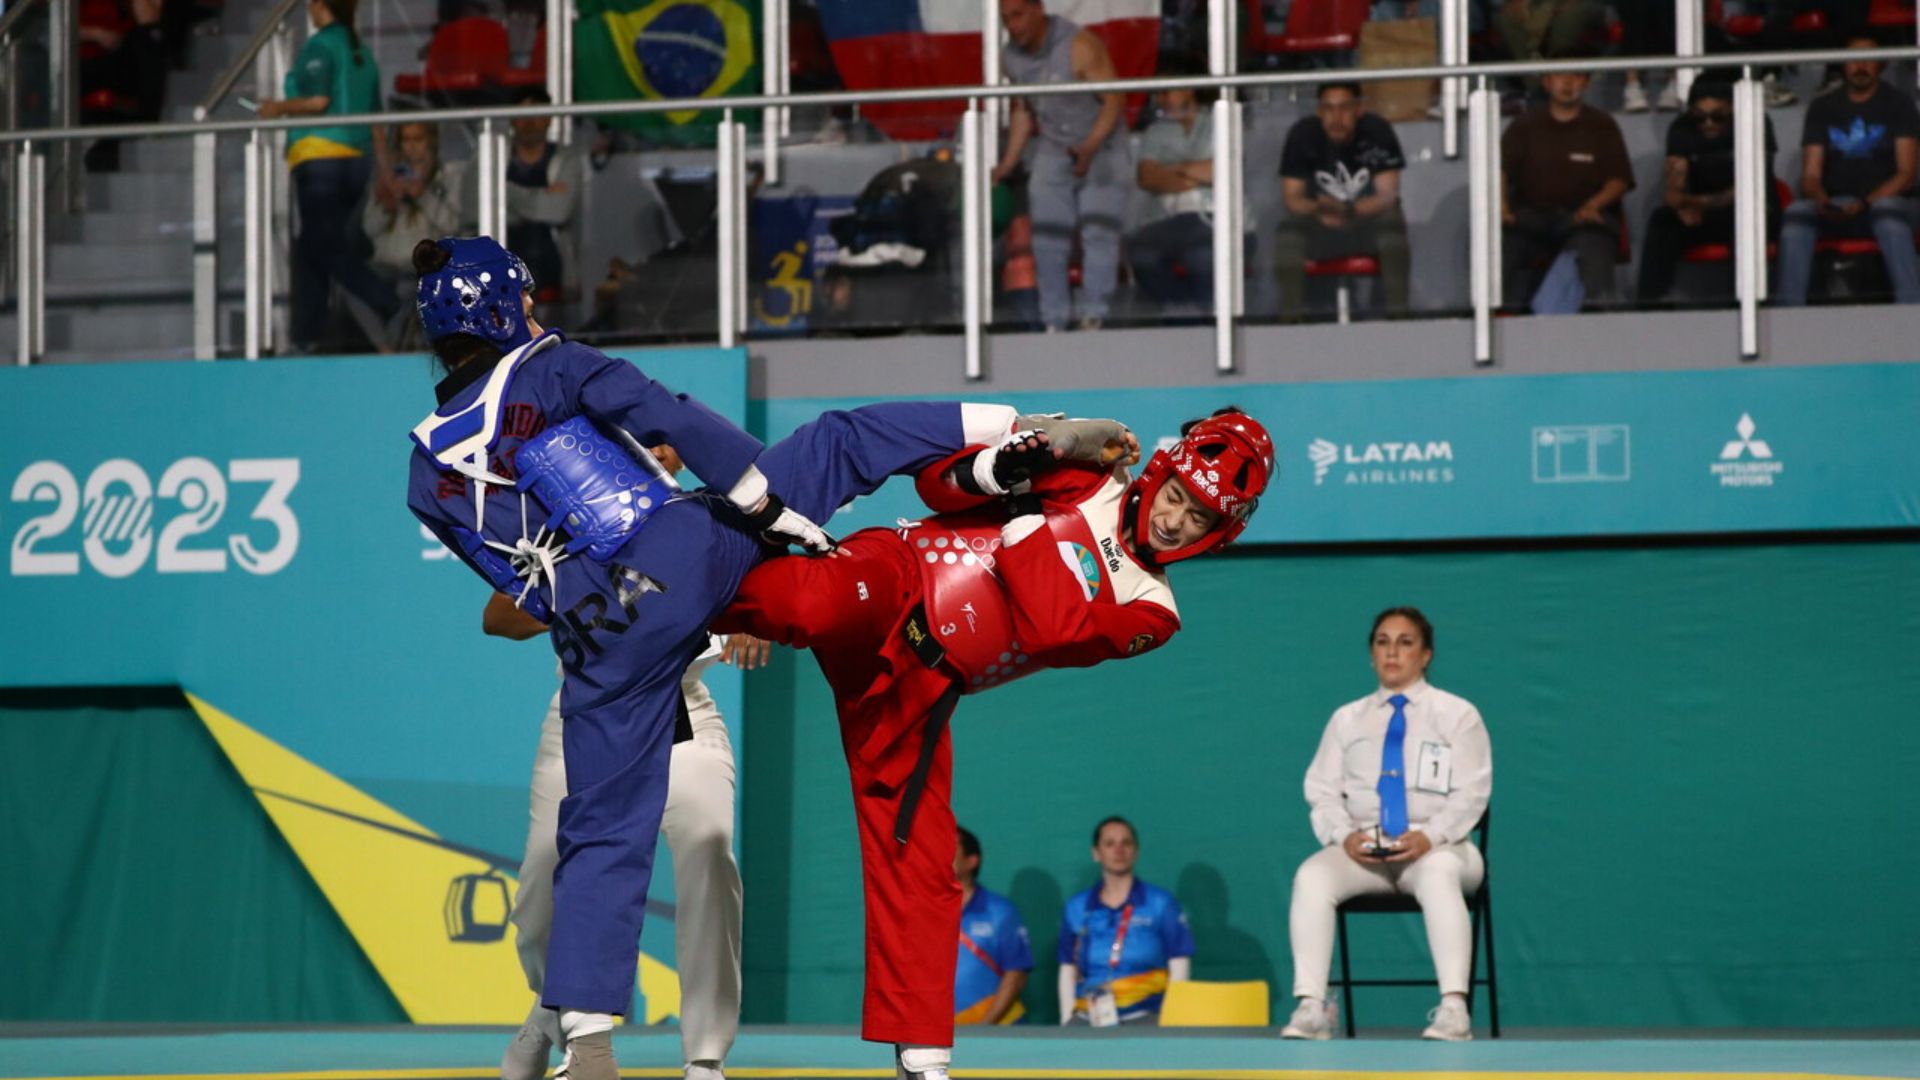 Chile falls to Brazil's experience in female’s taekwondo team competition